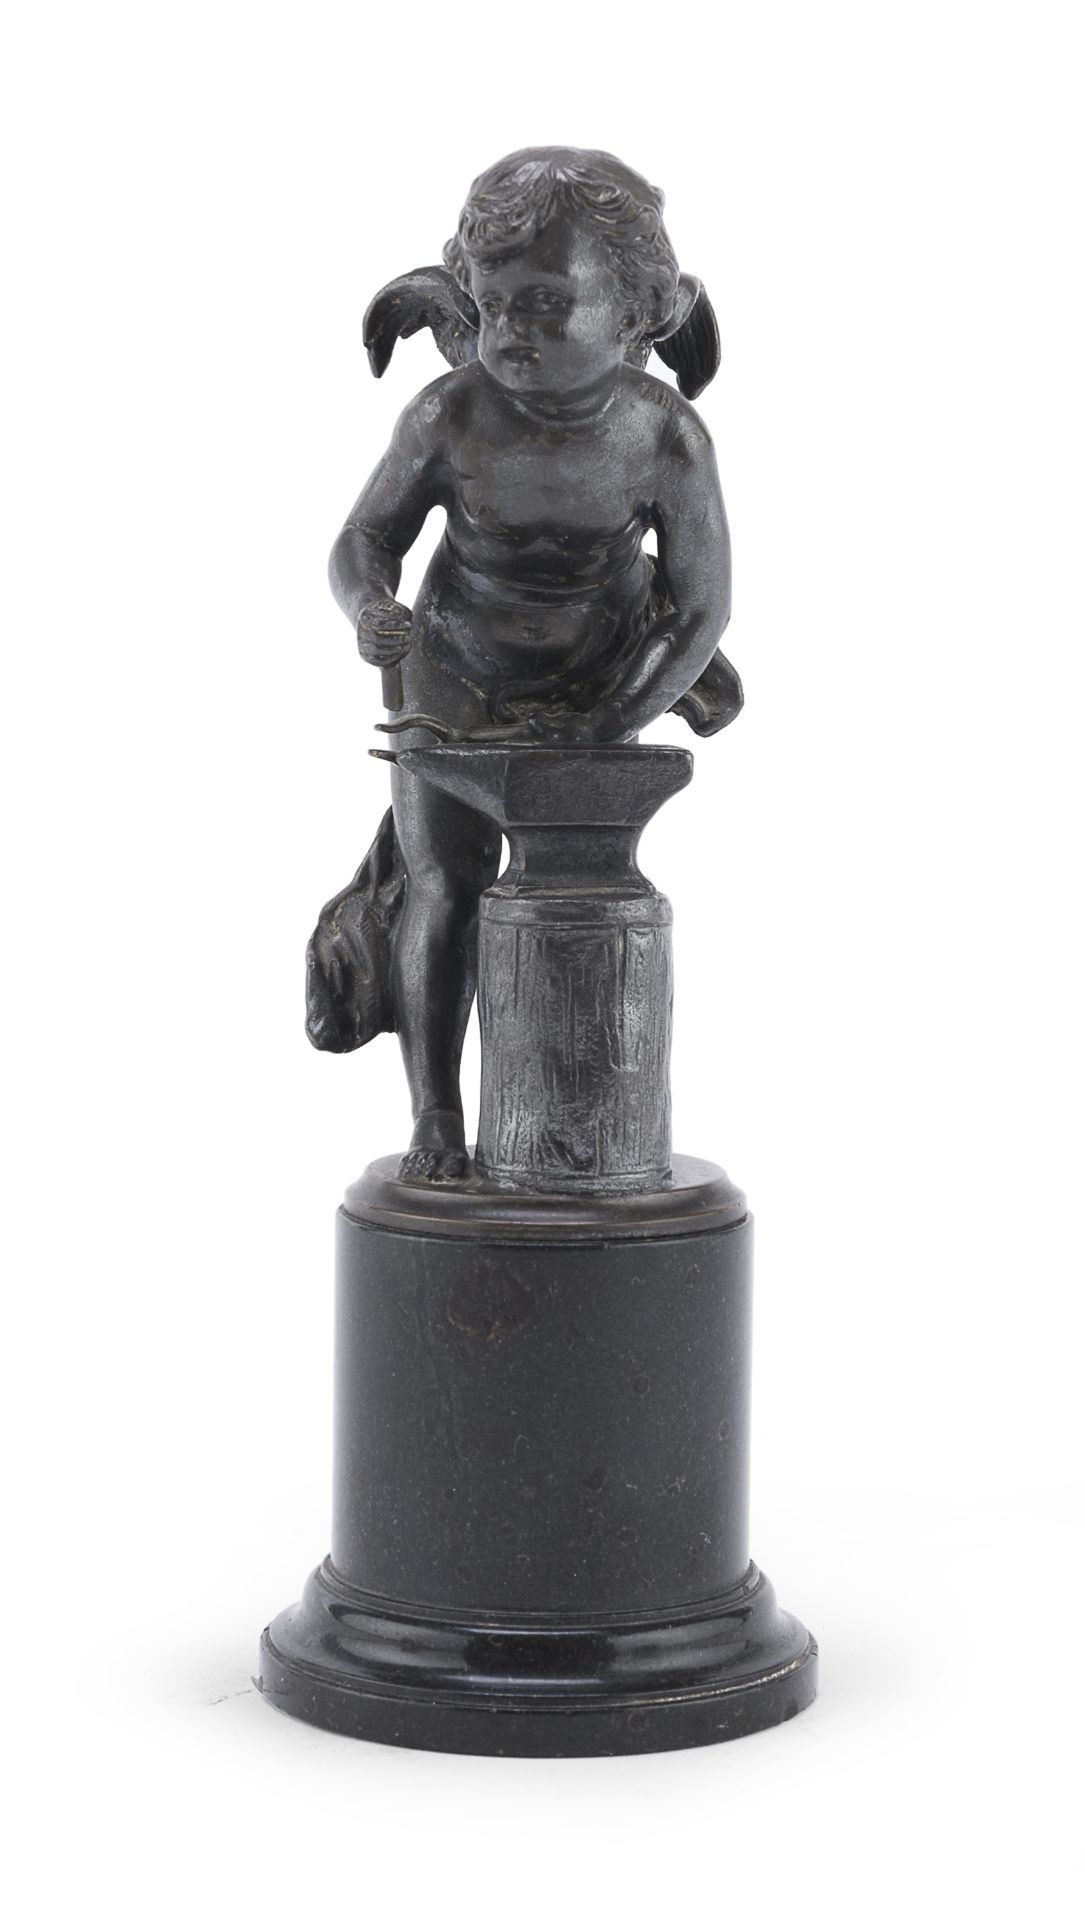 ALLEGORIC FIGURE IN SILVERED PEWTER LATE 19th CENTURY